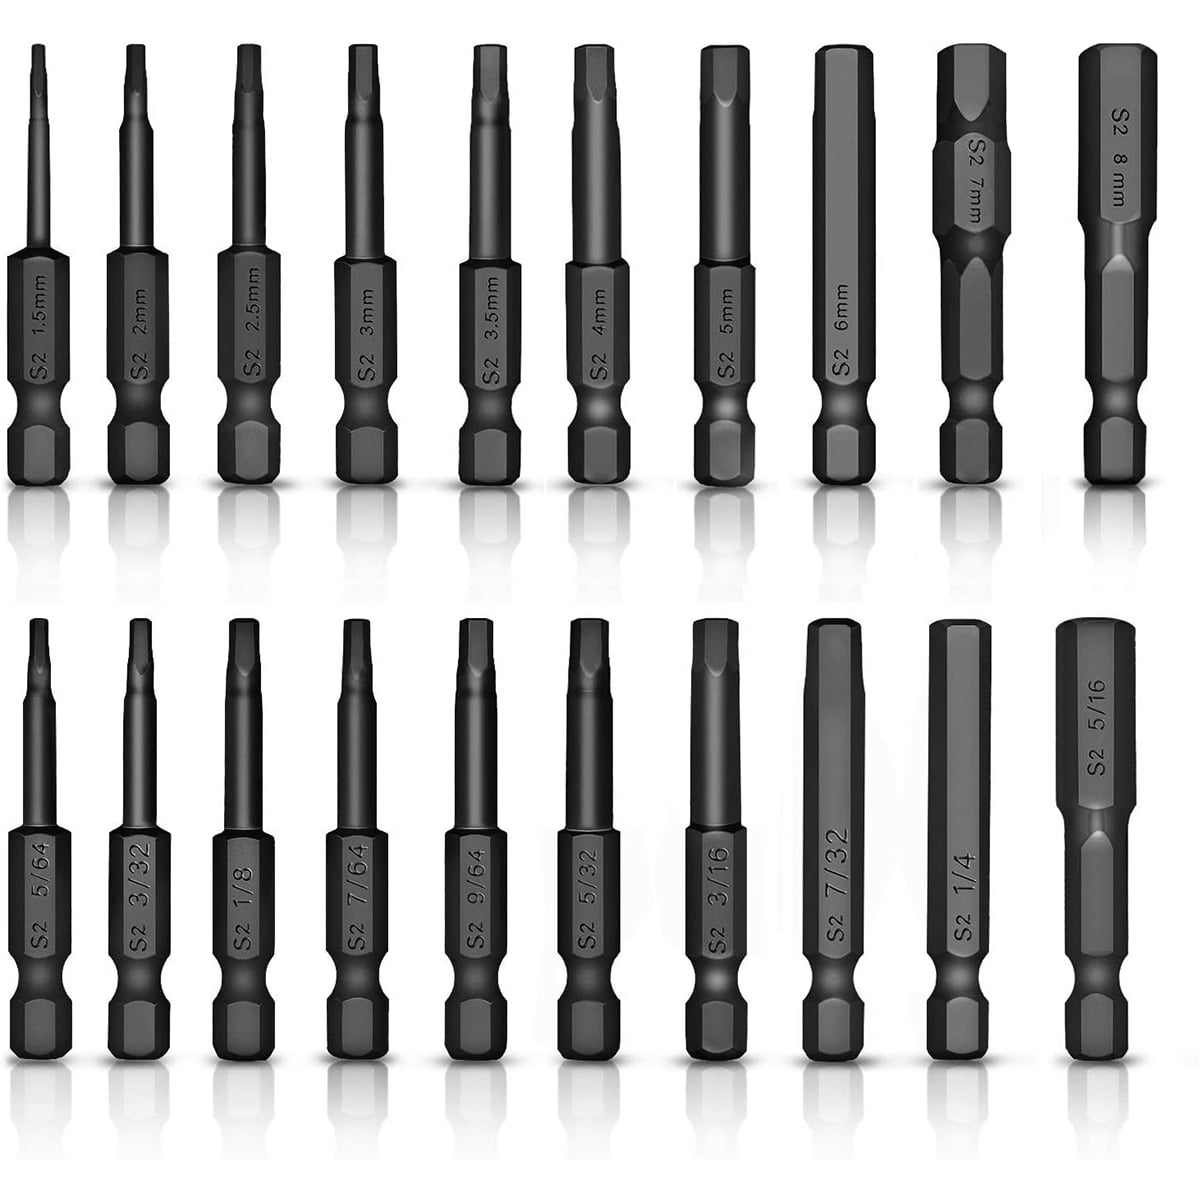 NEIKO 01147A Hex Allen Power Bit Set Magnetic Hex Head Bits 11-Piece SAE Sizes 1/16 to 5/16 3 Quick Release Shanks Compatible with Power Drills and Impact Drivers Premium S2 Steel 